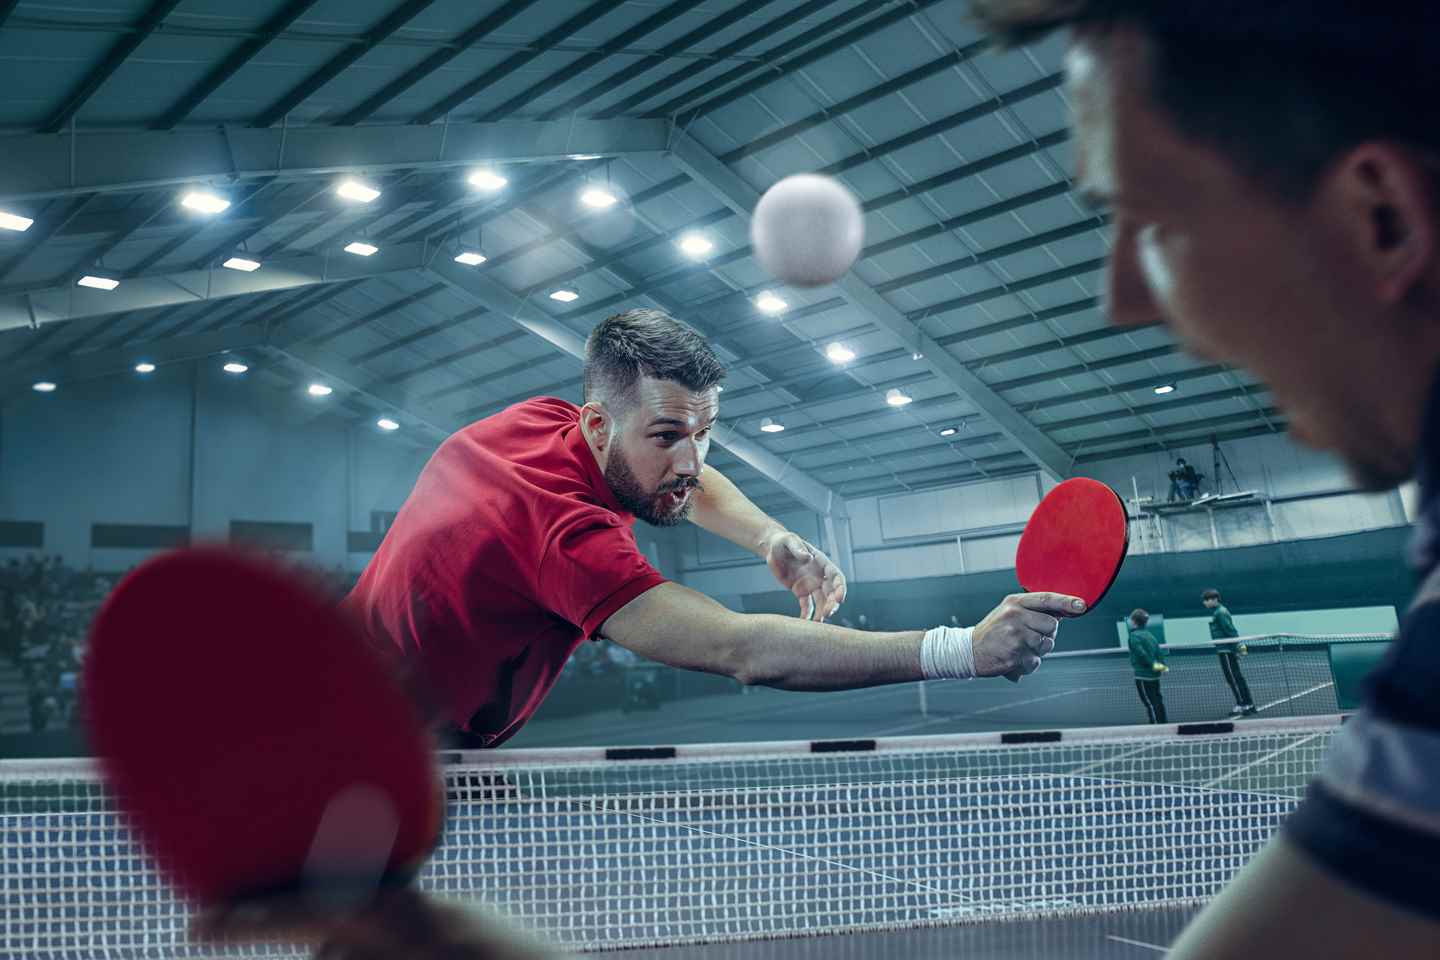 Best Table Tennis Rubber with High Control & Spin Rating